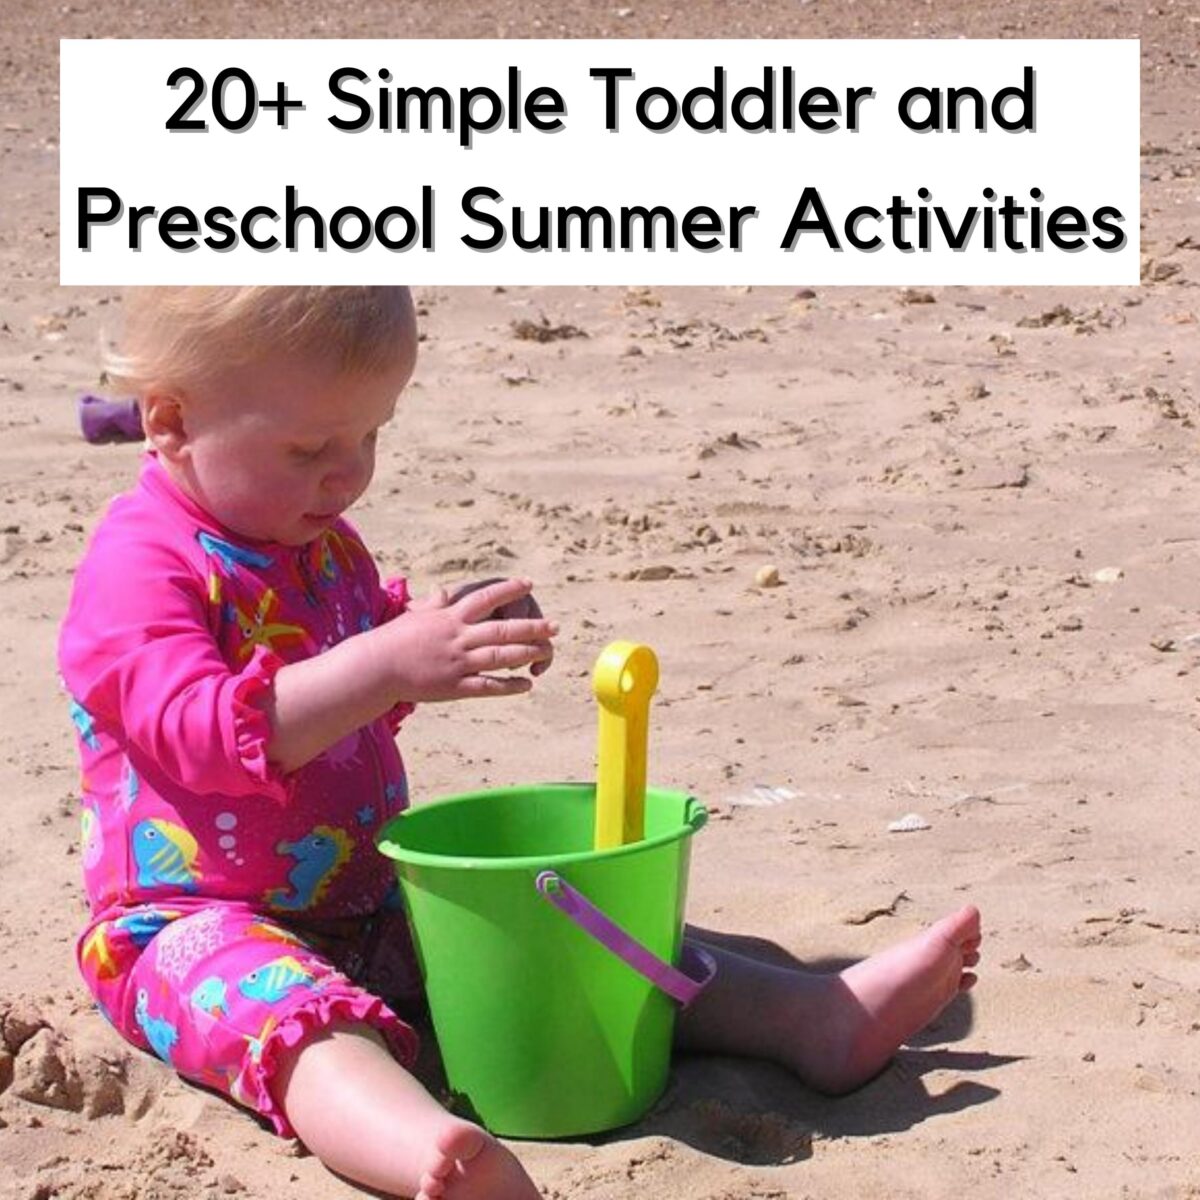 Toddler sitting on the beach in the summer playing with a bucket of sand. Text reads 20+ Simple Toddler and Preschool Summer Activities